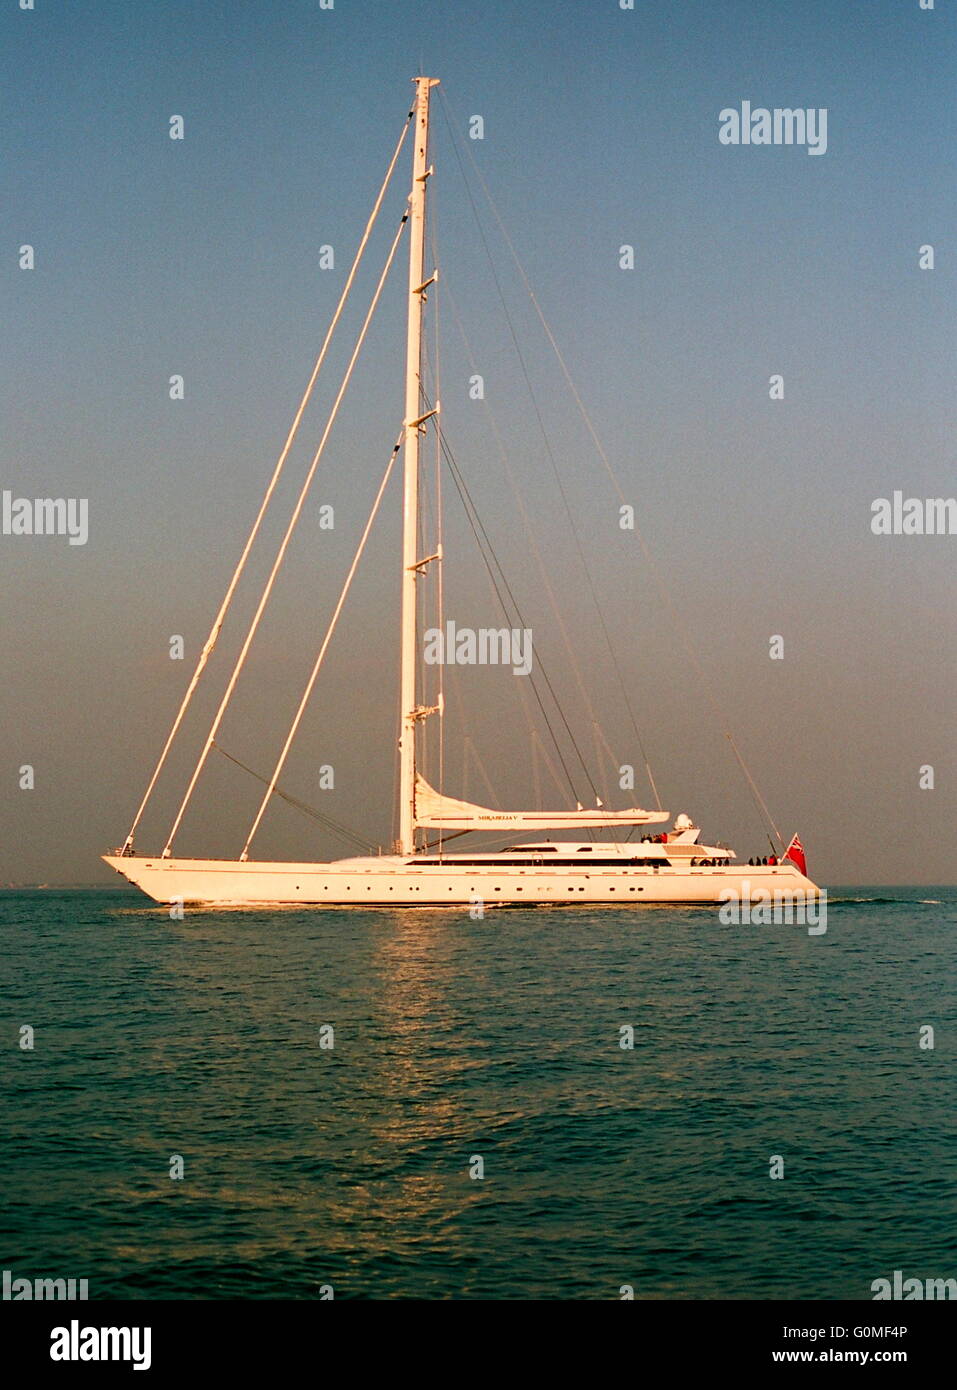 AJAX NEWS PHOTOS.13TH APRIL 2004. SOLENT, ENGLAND. - FIRST BOW - WORLD'S LARGEST SINGLE MASTED SAILING YACHT, MIRABELLA V - BUILT BY VOSPER THORNYCROFT FOR AMERICAN JOE VITTORIA - UNDER WAY SOUTH OF THE ISLE OF WIGHT. THE 245FT (75.2M) LONG YACHT HAS A  290FT (88.5M) TALL MAST;  SHE CAN CARRY UP 36,490 SQ FT (3,400 SQ M) SQ METERS OF SAIL. PHOTO:JESSICA EASTLAND/AJAX.   REF: 41304 3 Stock Photo